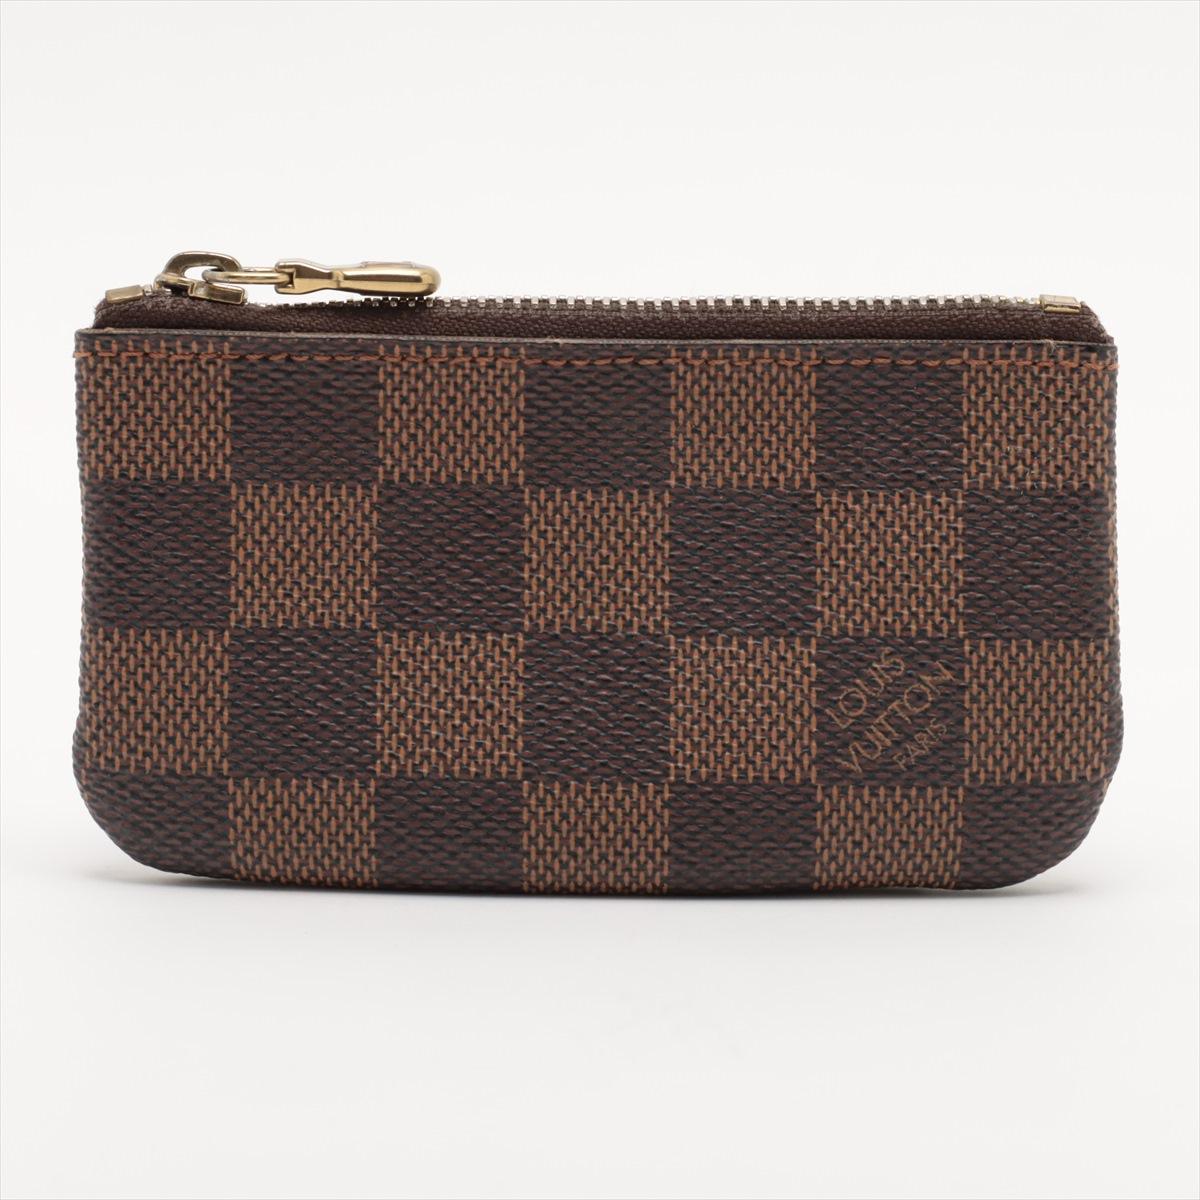 The Louis Vuitton Damier Ebene Coin Case is a compact and stylish accessory that seamlessly blends practicality with iconic design. Crafted with meticulous attention to detail, the coin case features the classic Damier Ebene canvas, showcasing the